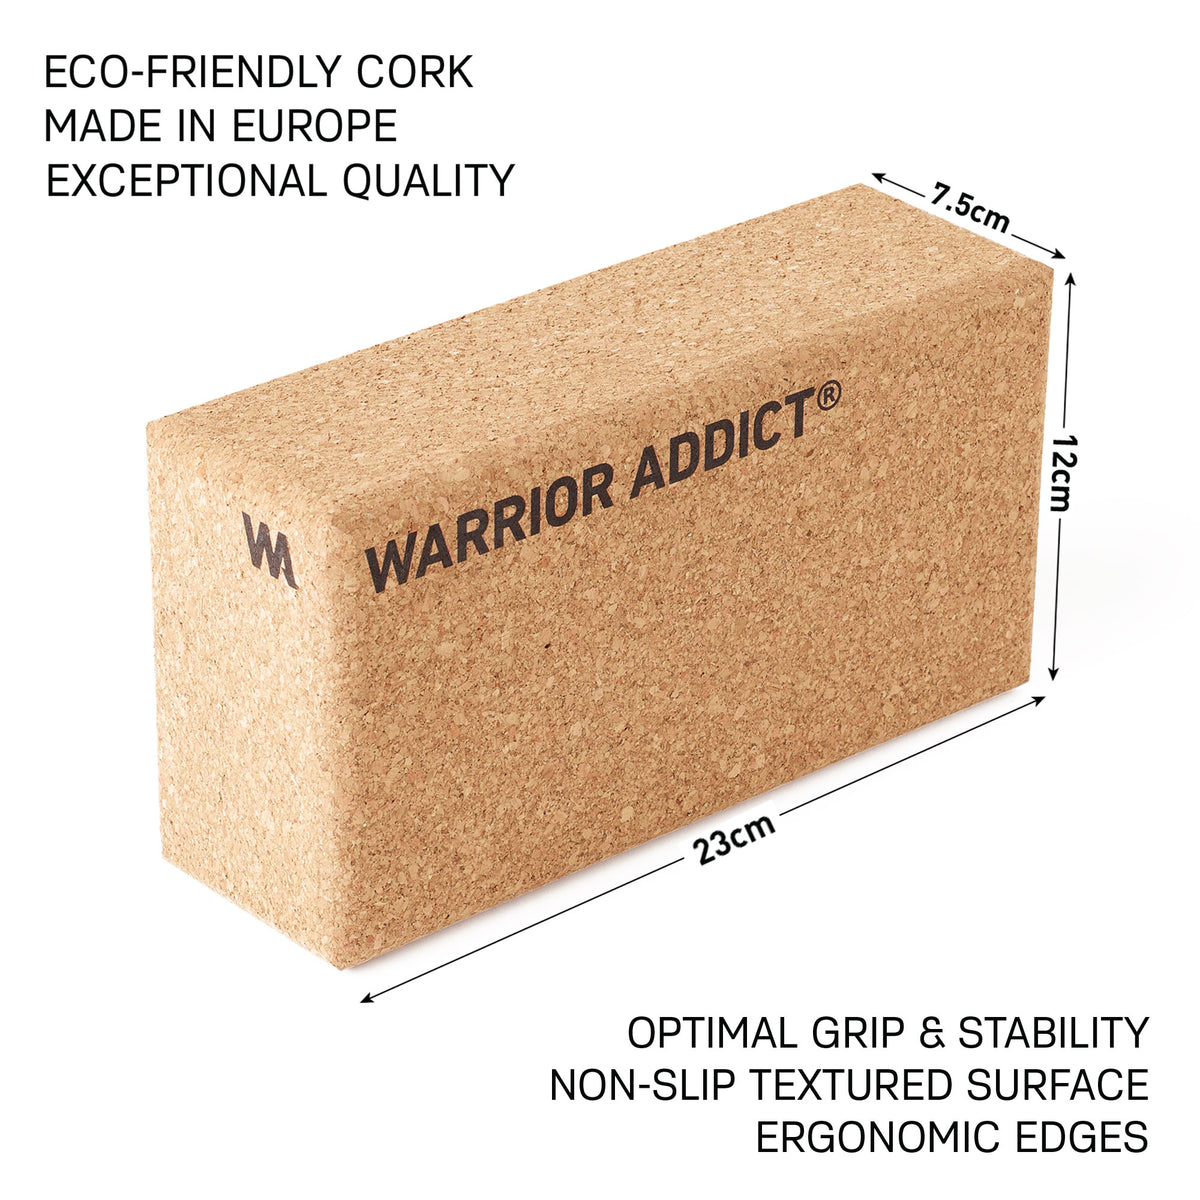 cork yoga block by warrior addict sowing measurements 